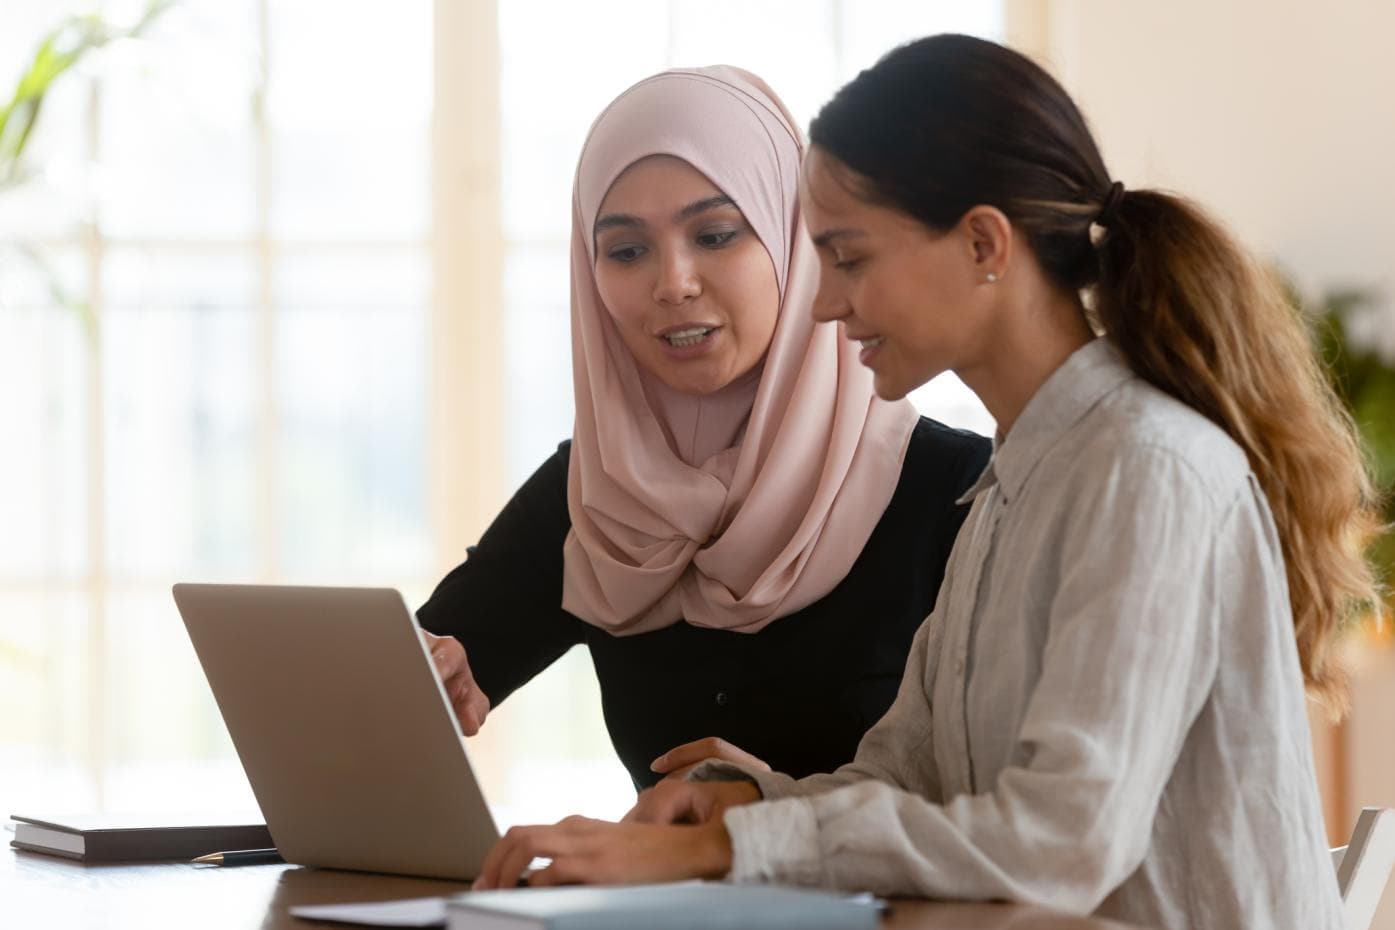 Two young women at a laptop having a conversation